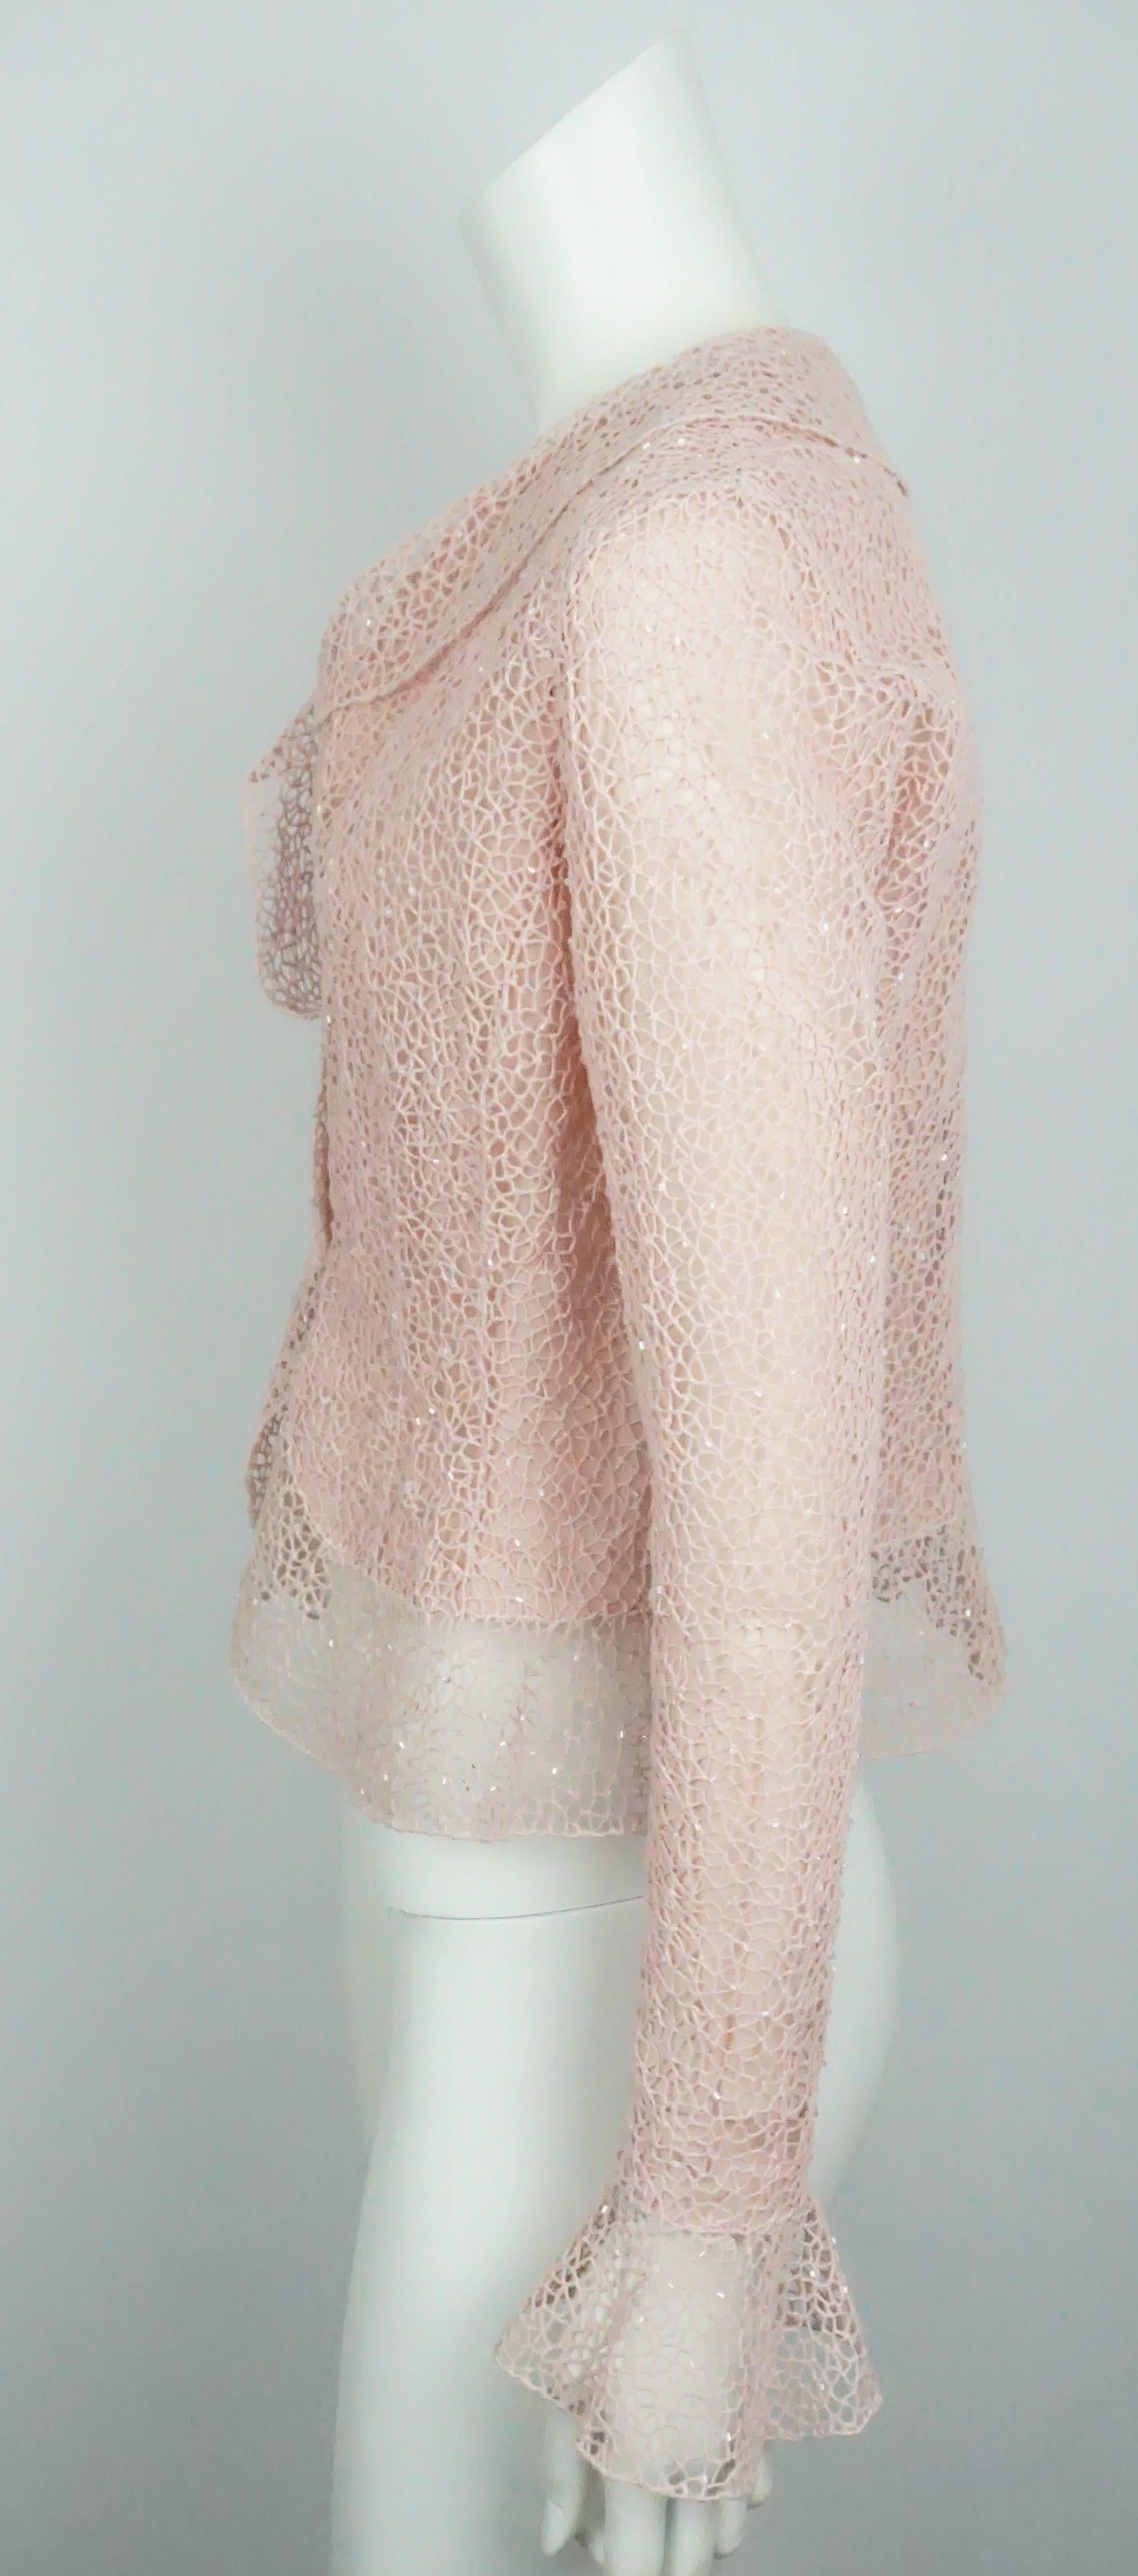 Oscar De La Renta Pink Crochet Lace Sequin Jacket - 8  This beautiful cotton jacket is in good condition. There are minor stains around the wrist and in one of the armpits of the jacket. It is lined in silk organza and there are two jewels that